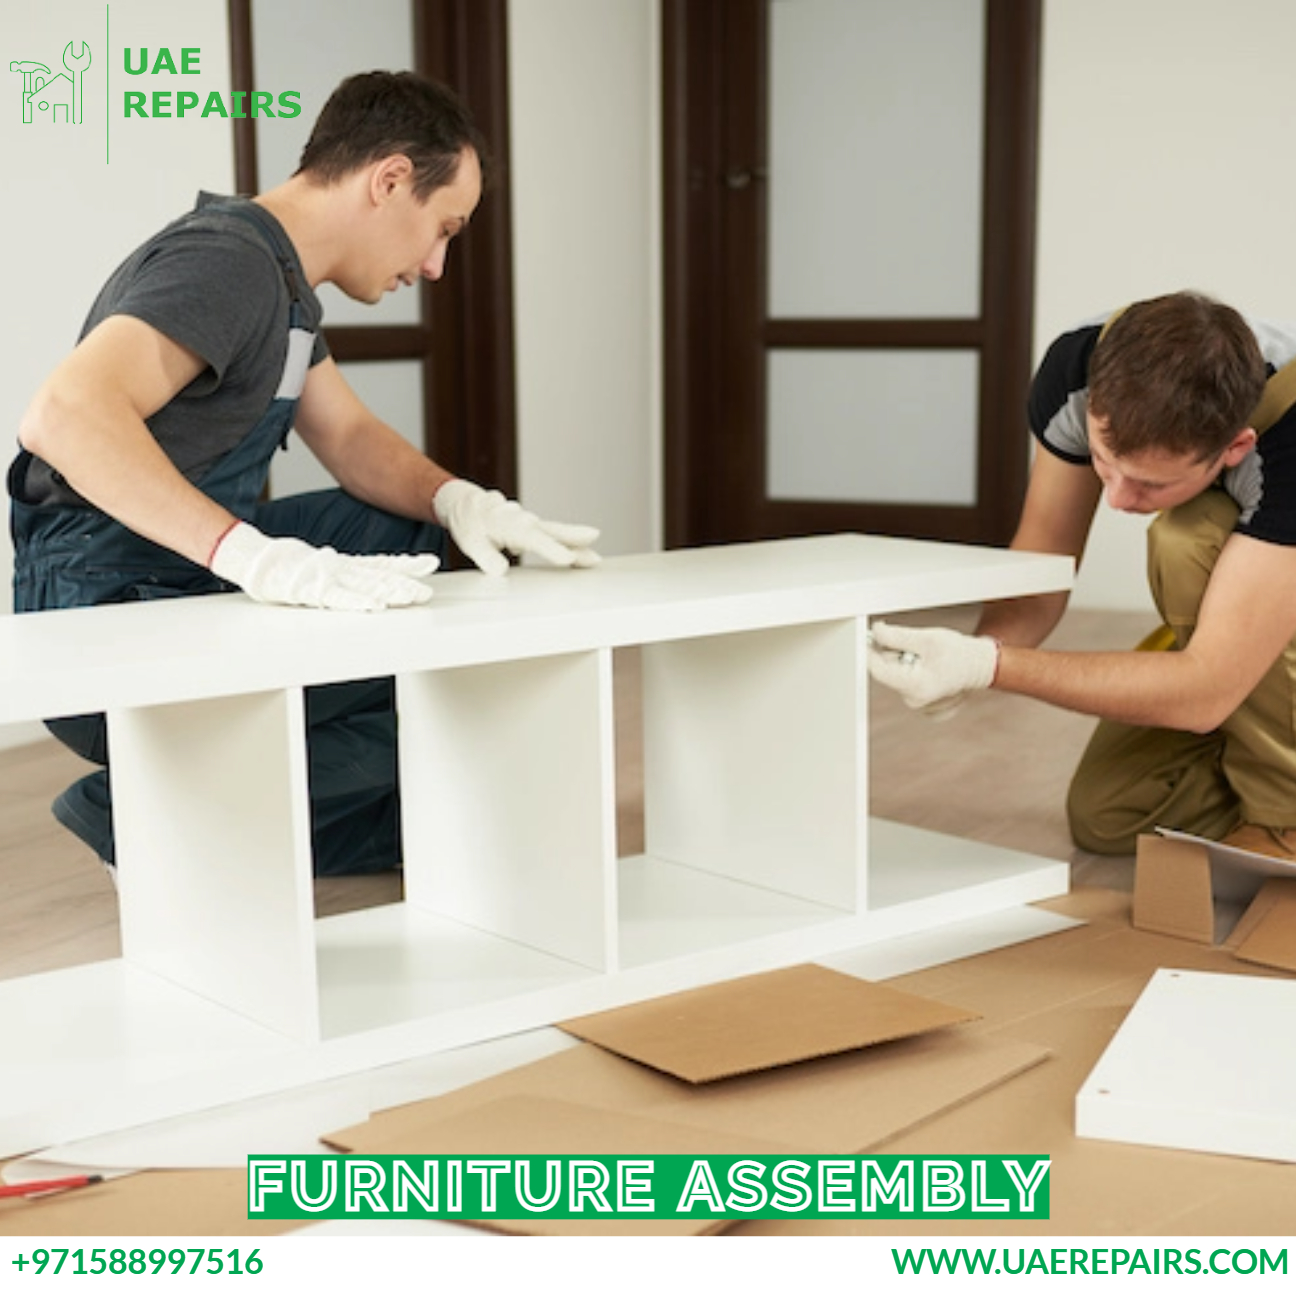 UAE REPAIRS Expert Furniture assembly services 